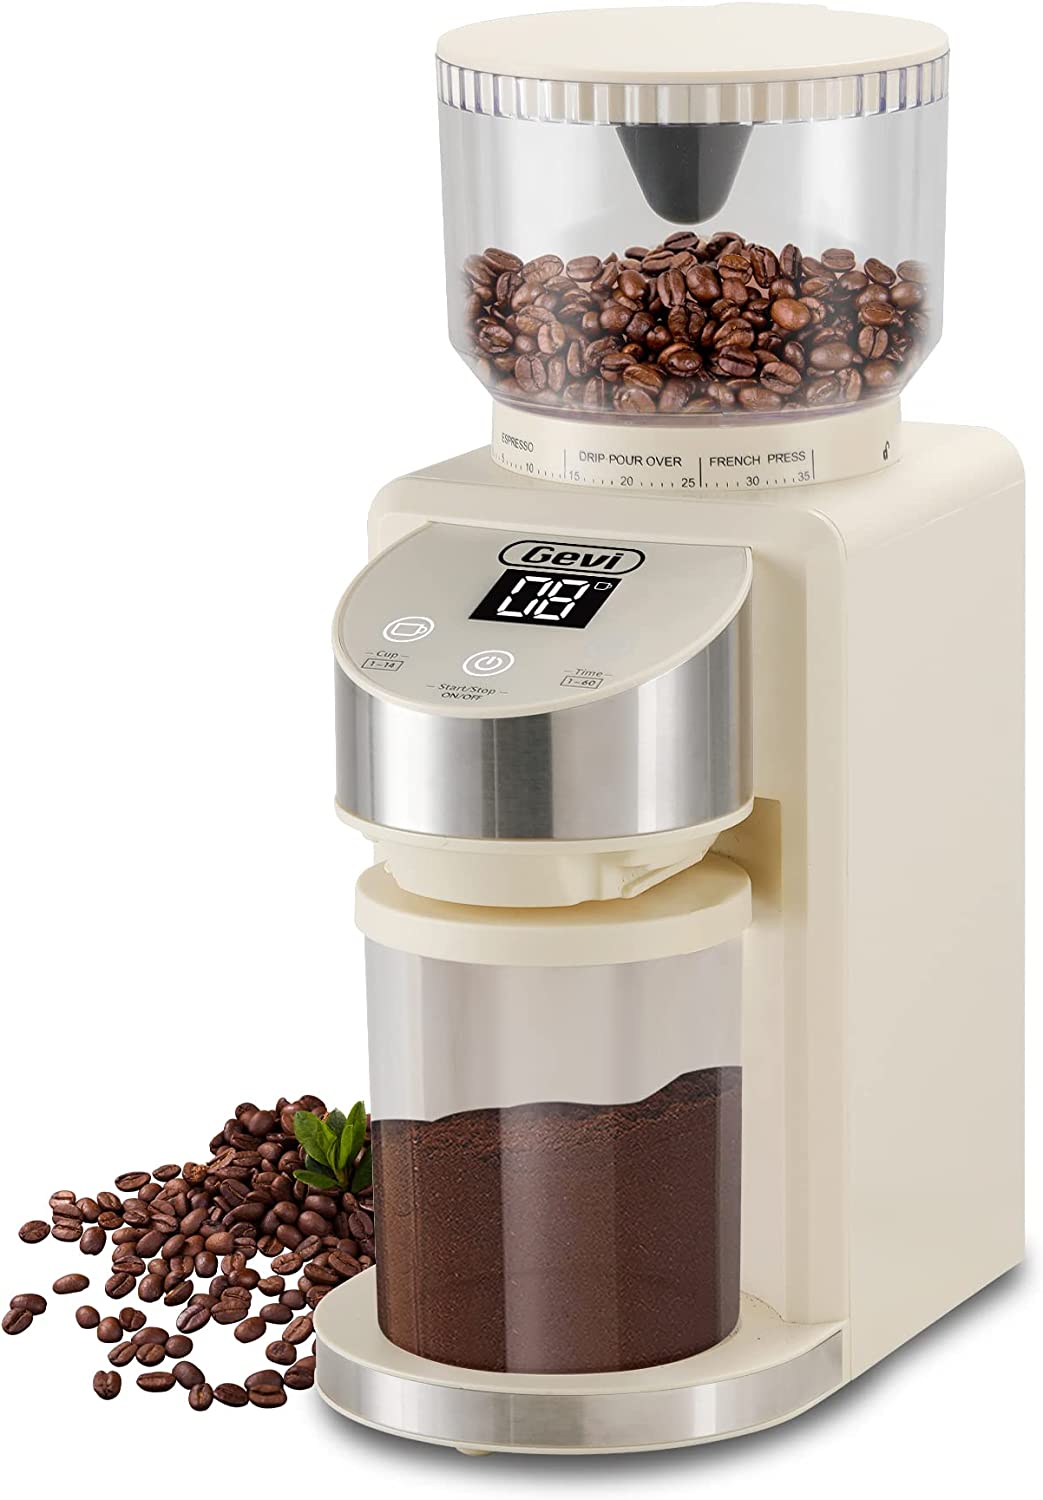 Gevi 12 Cup Coffee Grinder with Removable Stainless Steel Bowl – GEVI